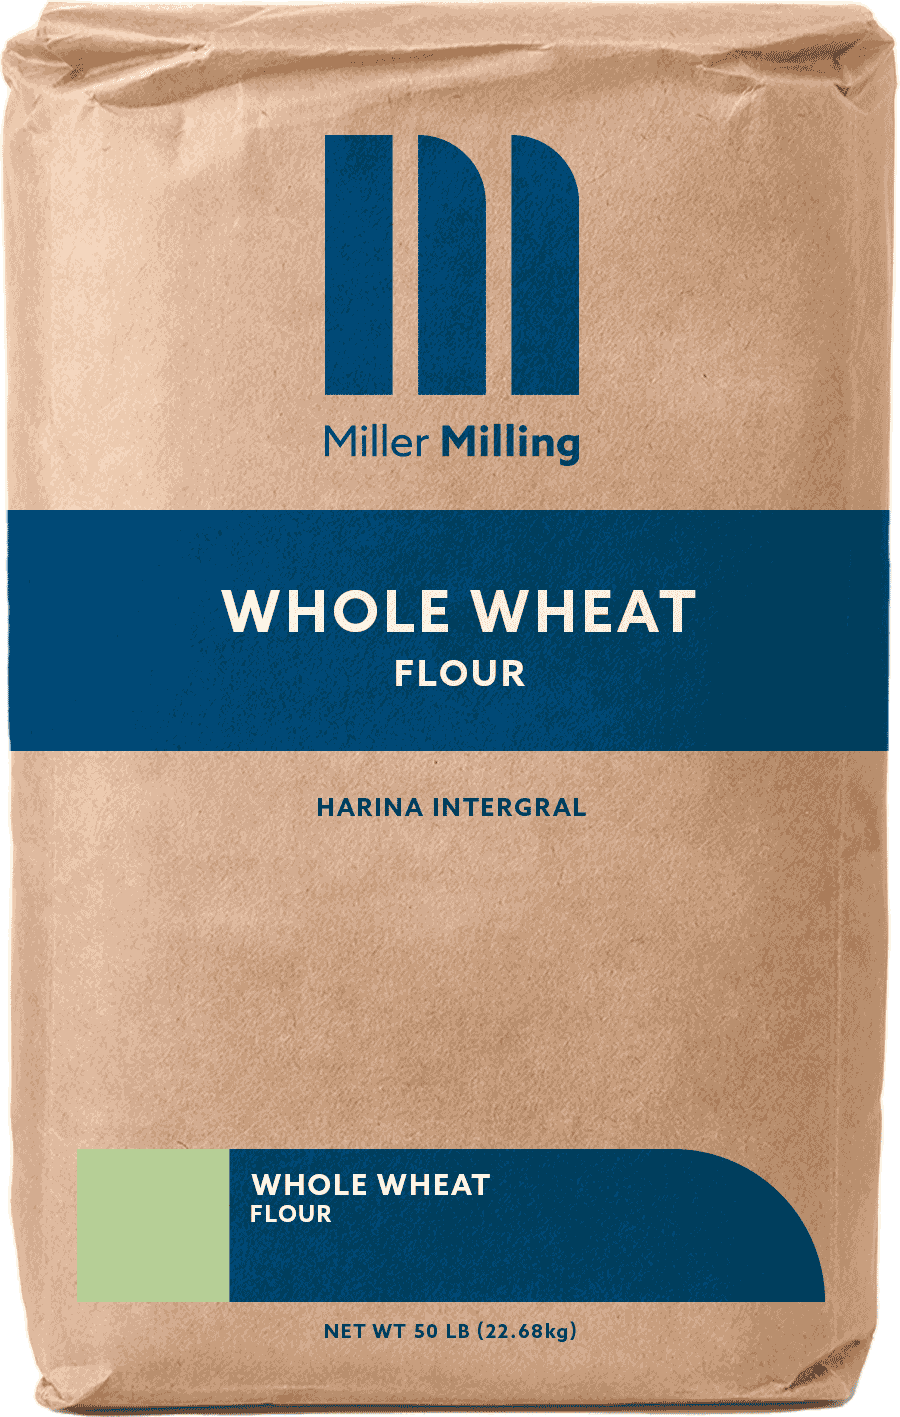 Spring Whole Wheat